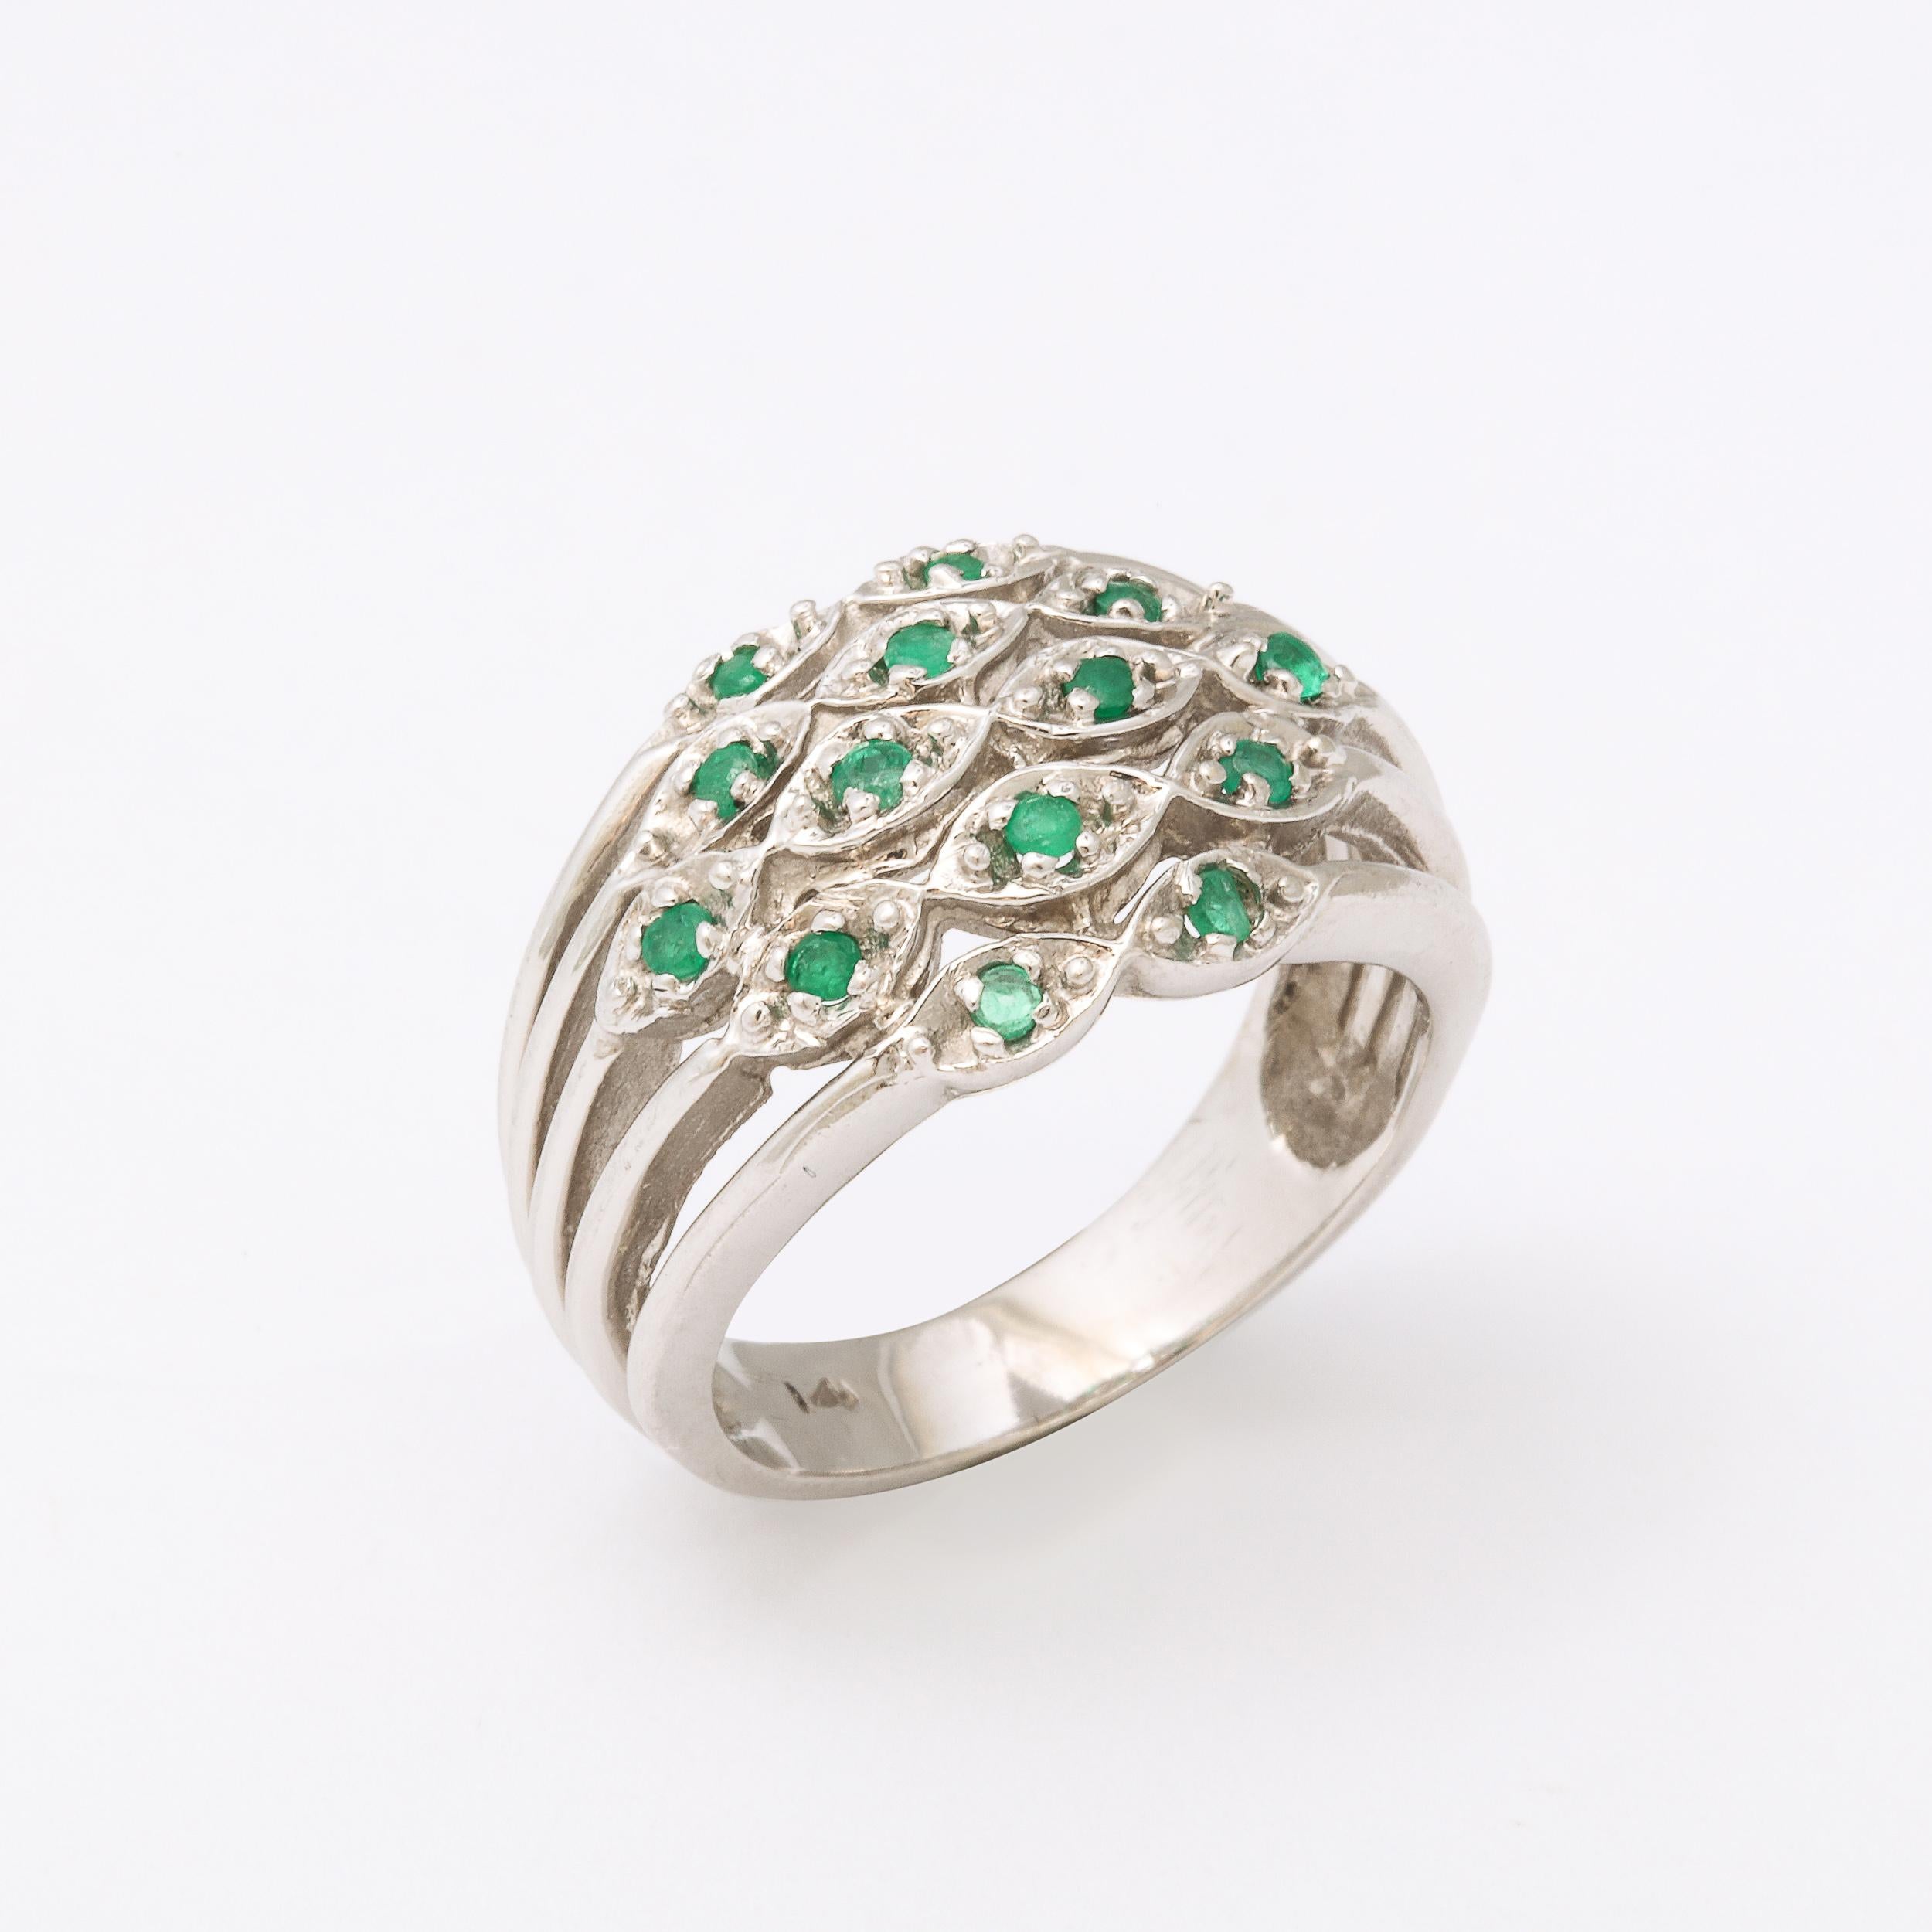 This Modernist 14k white gold ring with a central panel of Lozenge form pendants displaying 14 round cut emeralds.
It is marked 14k  and is a size 8 but buyer can  have it sized to suit. It has a great stylized linear design.  Excellent Vintage